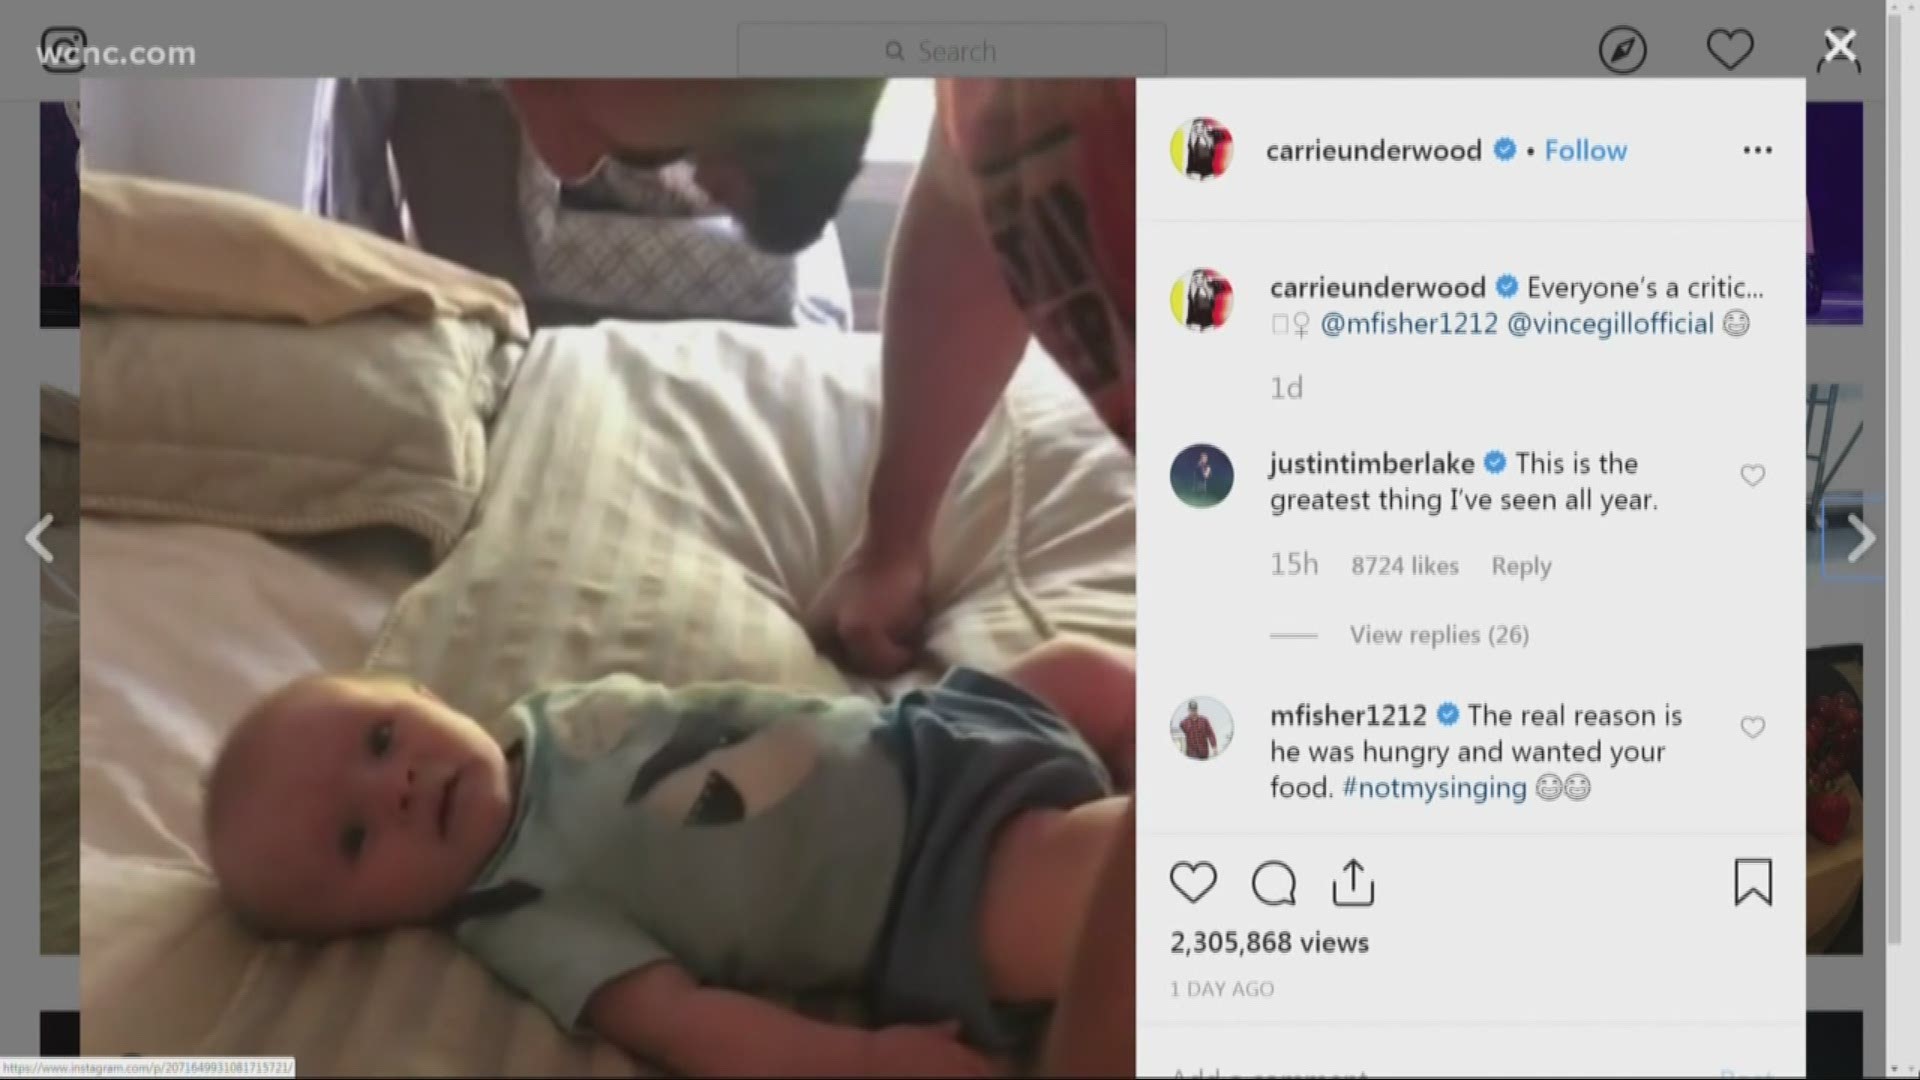 Country music star Carrie Underwood shared an adorable video on Instagram of her 5-month-old son Jacob's reaction to her singing compared to when his dad, Mike Fisher, tried to soothe his crying.